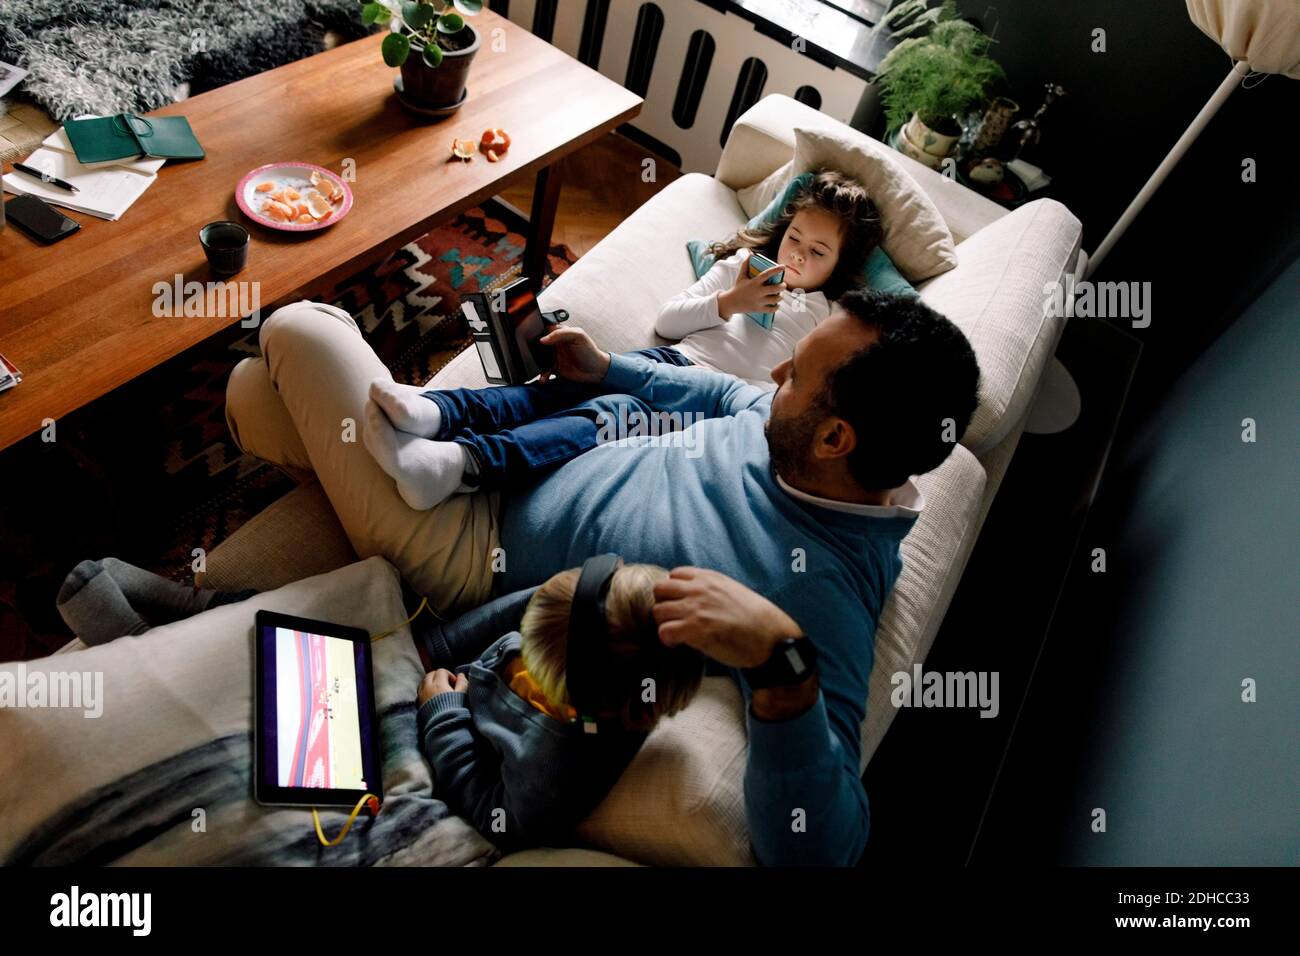 High angle view of father and daughters using various technologies on couch in living room at home Stock Photo